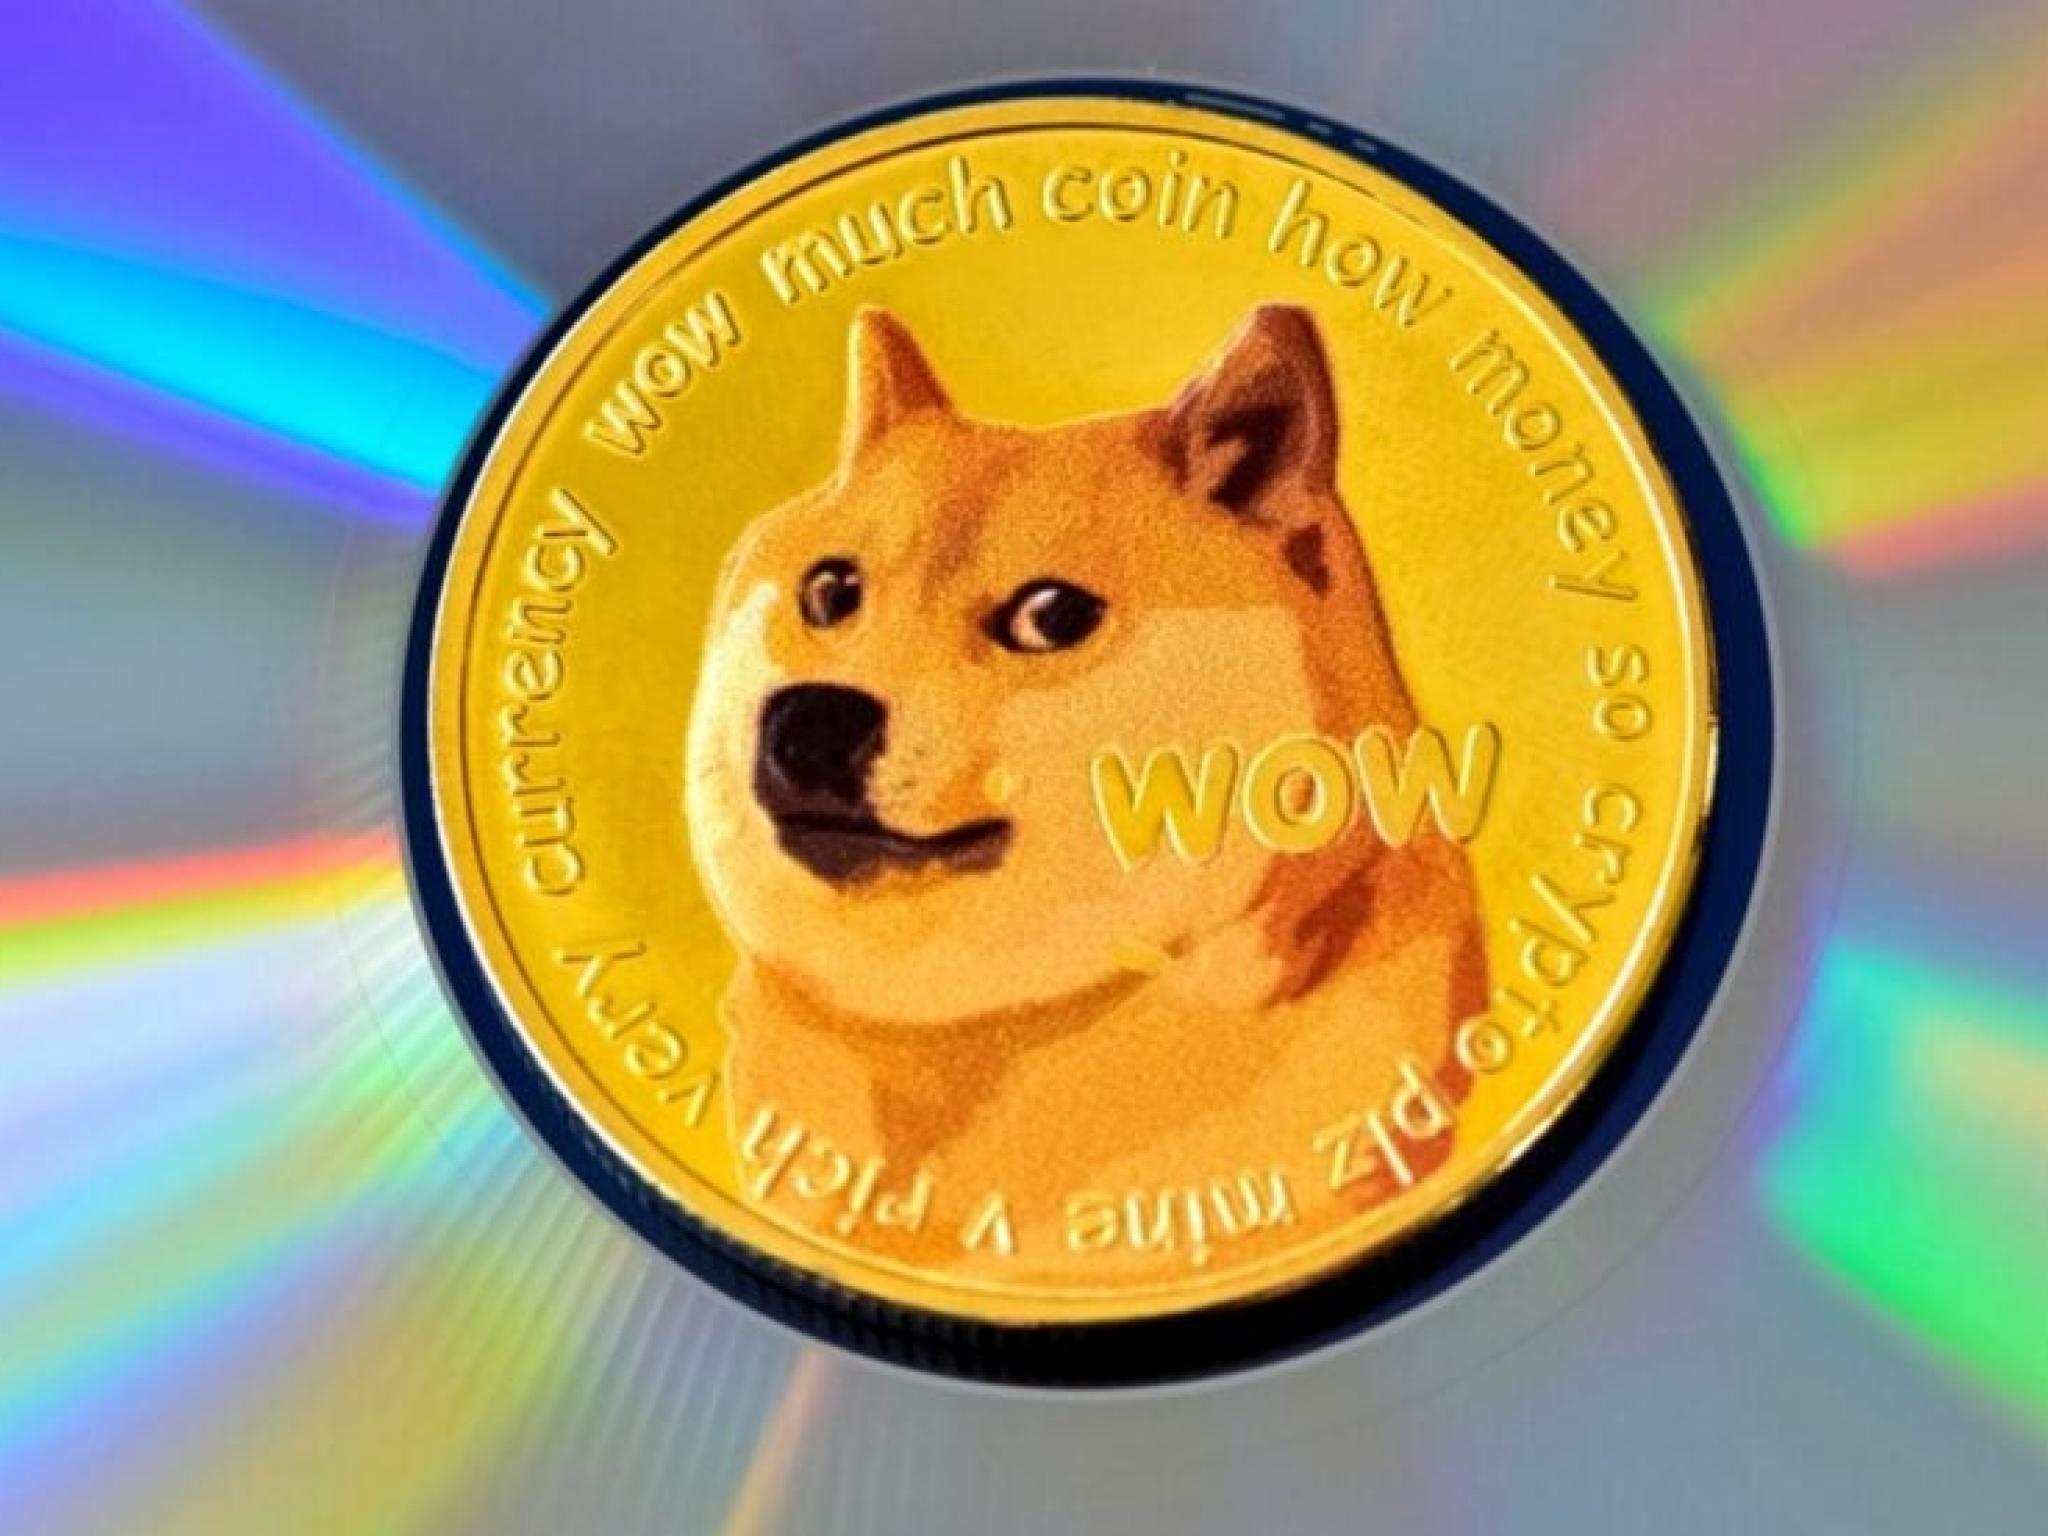  dogecoin-could-outperform-bitcoin-thanks-to-consolidation-in-the-golden-pocket-says-trader-this-is-a-very-good-sign 